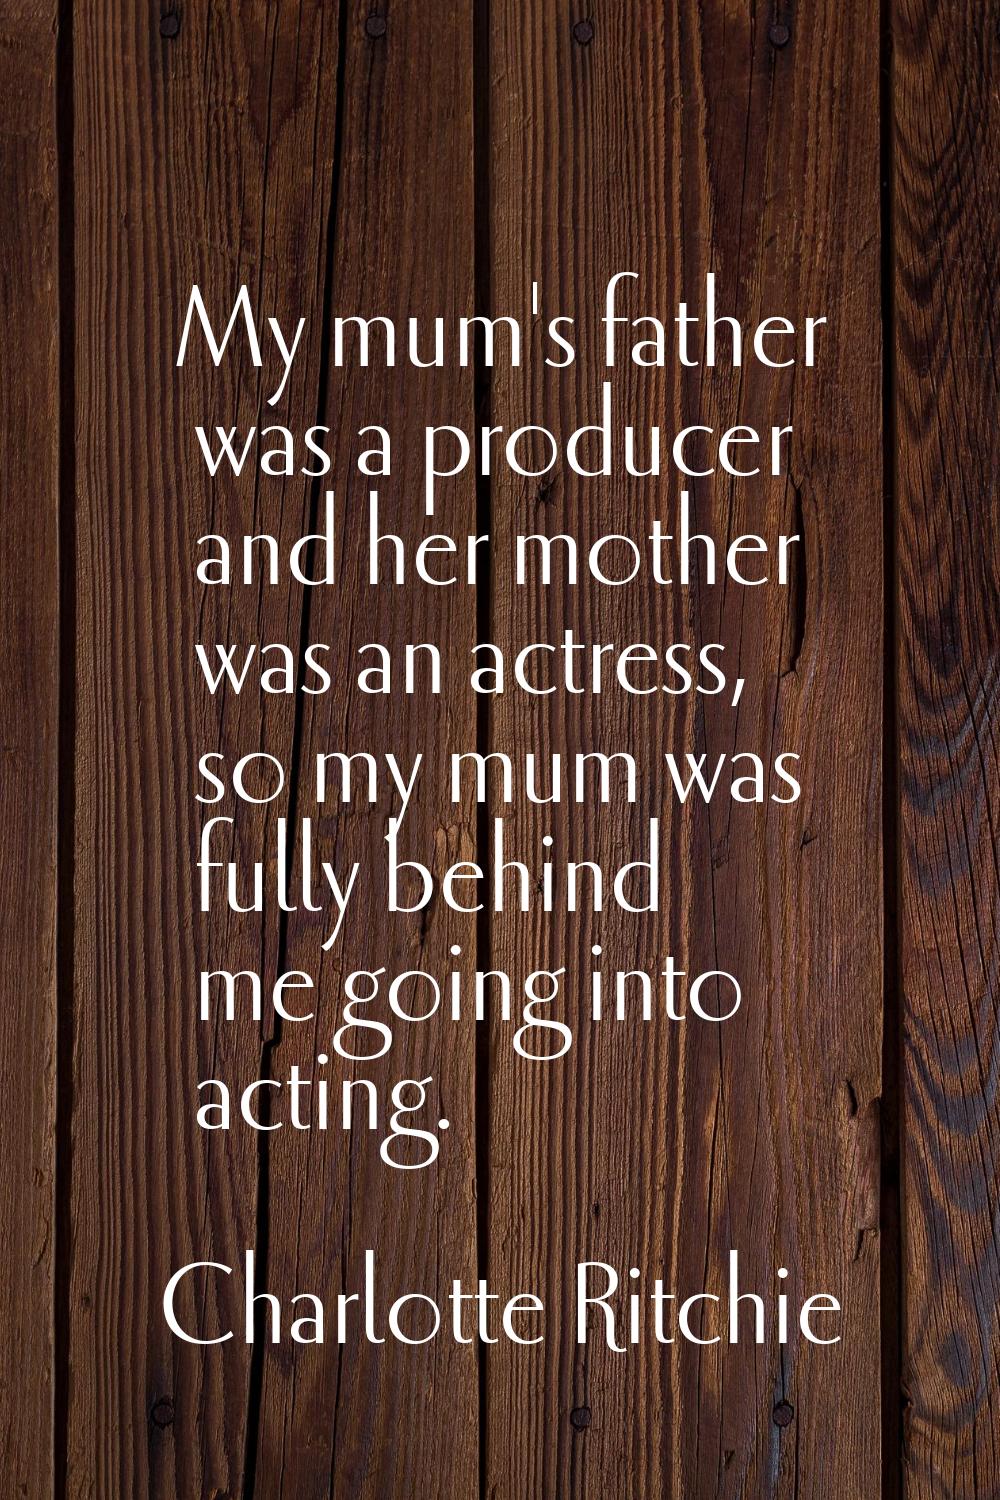 My mum's father was a producer and her mother was an actress, so my mum was fully behind me going i